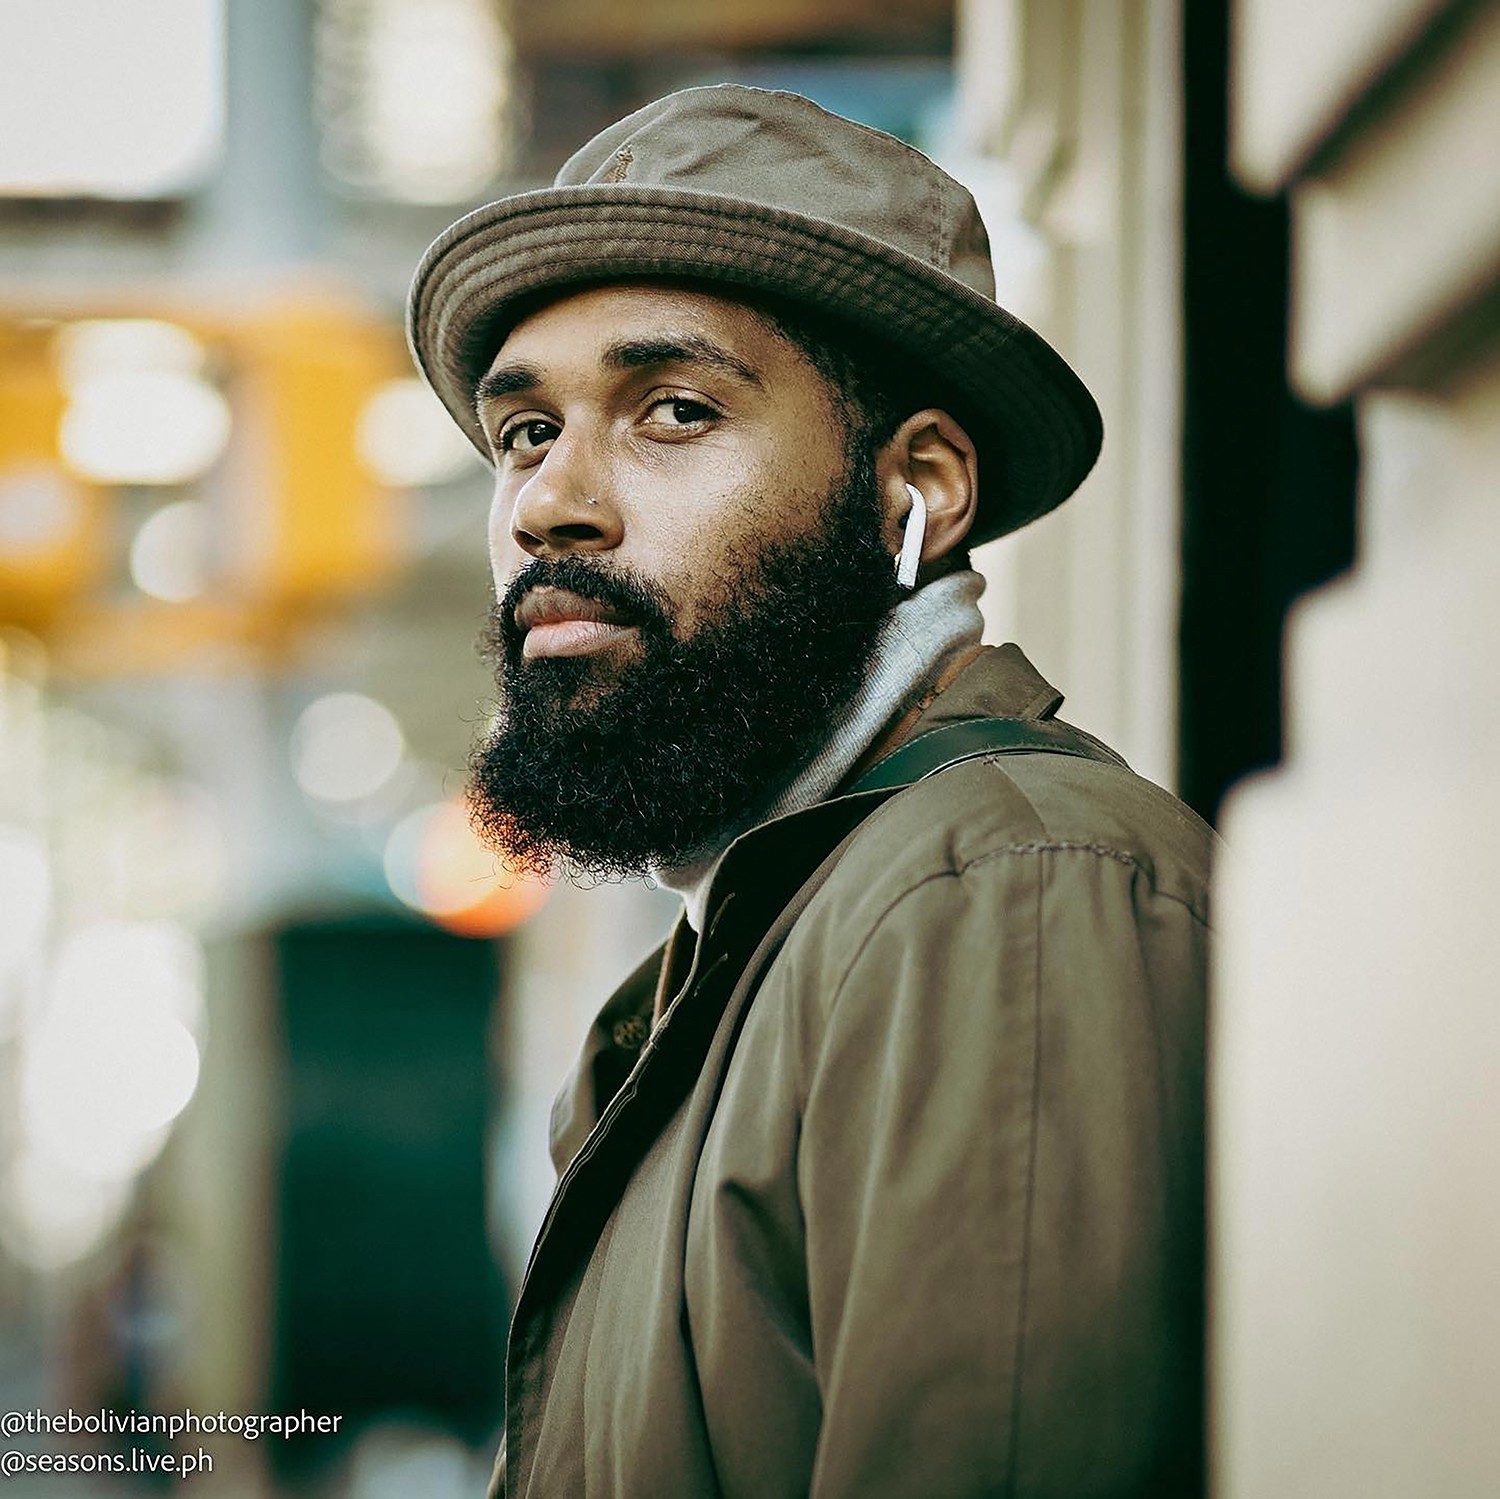 black man with beard, wearing hat and airpods, gazes slightly off camera. blurred cityscape behind him.